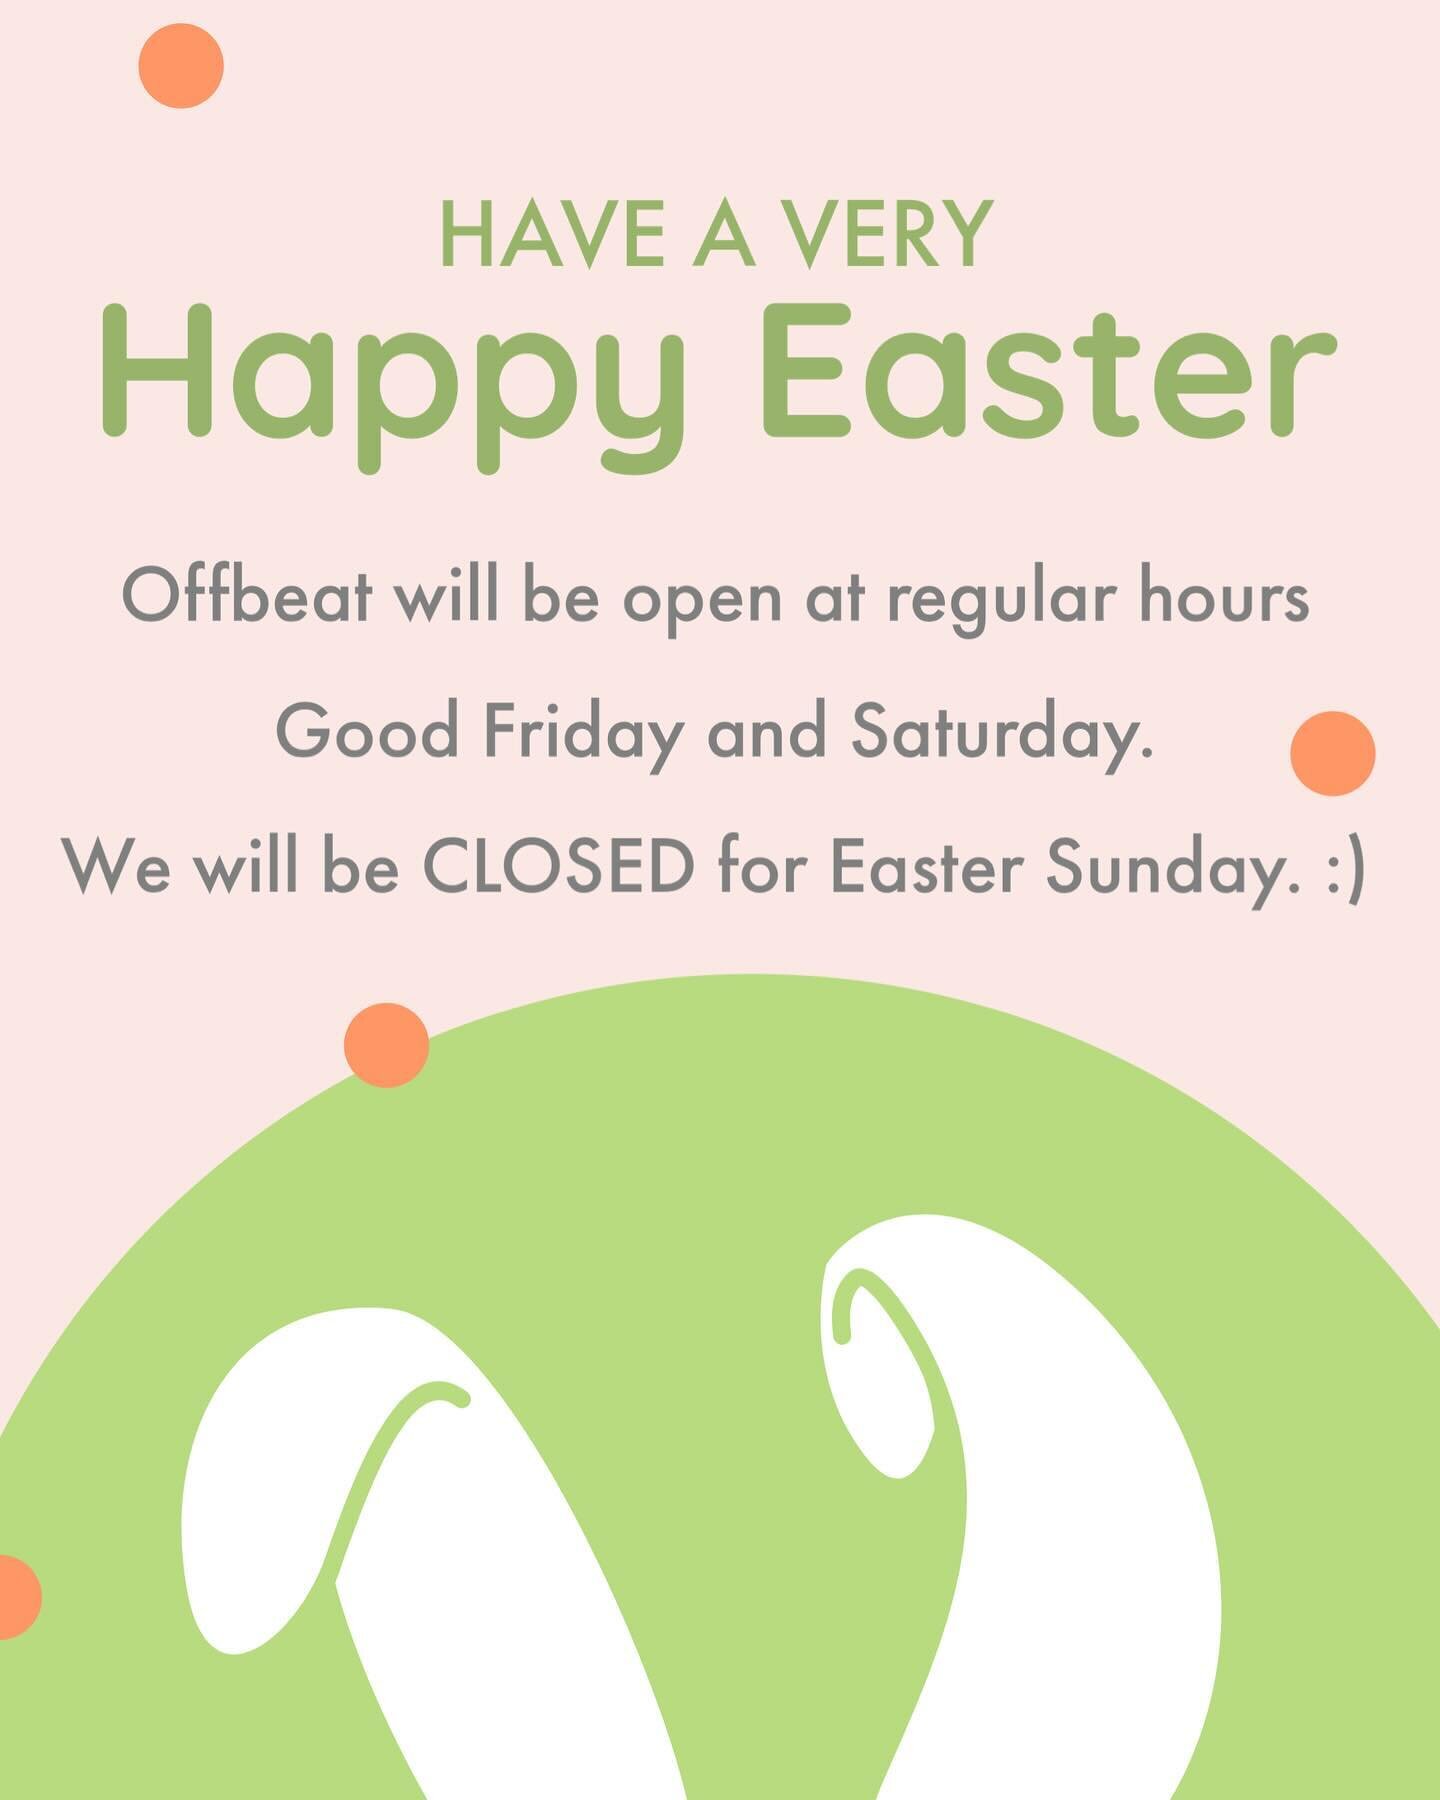 Heads up for holiday hours, ya&rsquo;ll! We&rsquo;ll be open for our usual hours of 10-6pm (grocery) and 11-6pm (deli) on Friday and Saturday.

We will be closed for Easter Sunday. Have a happy Easter! 🐰👒🌻

#offbeatgeneralstore #taylorms #pleinair